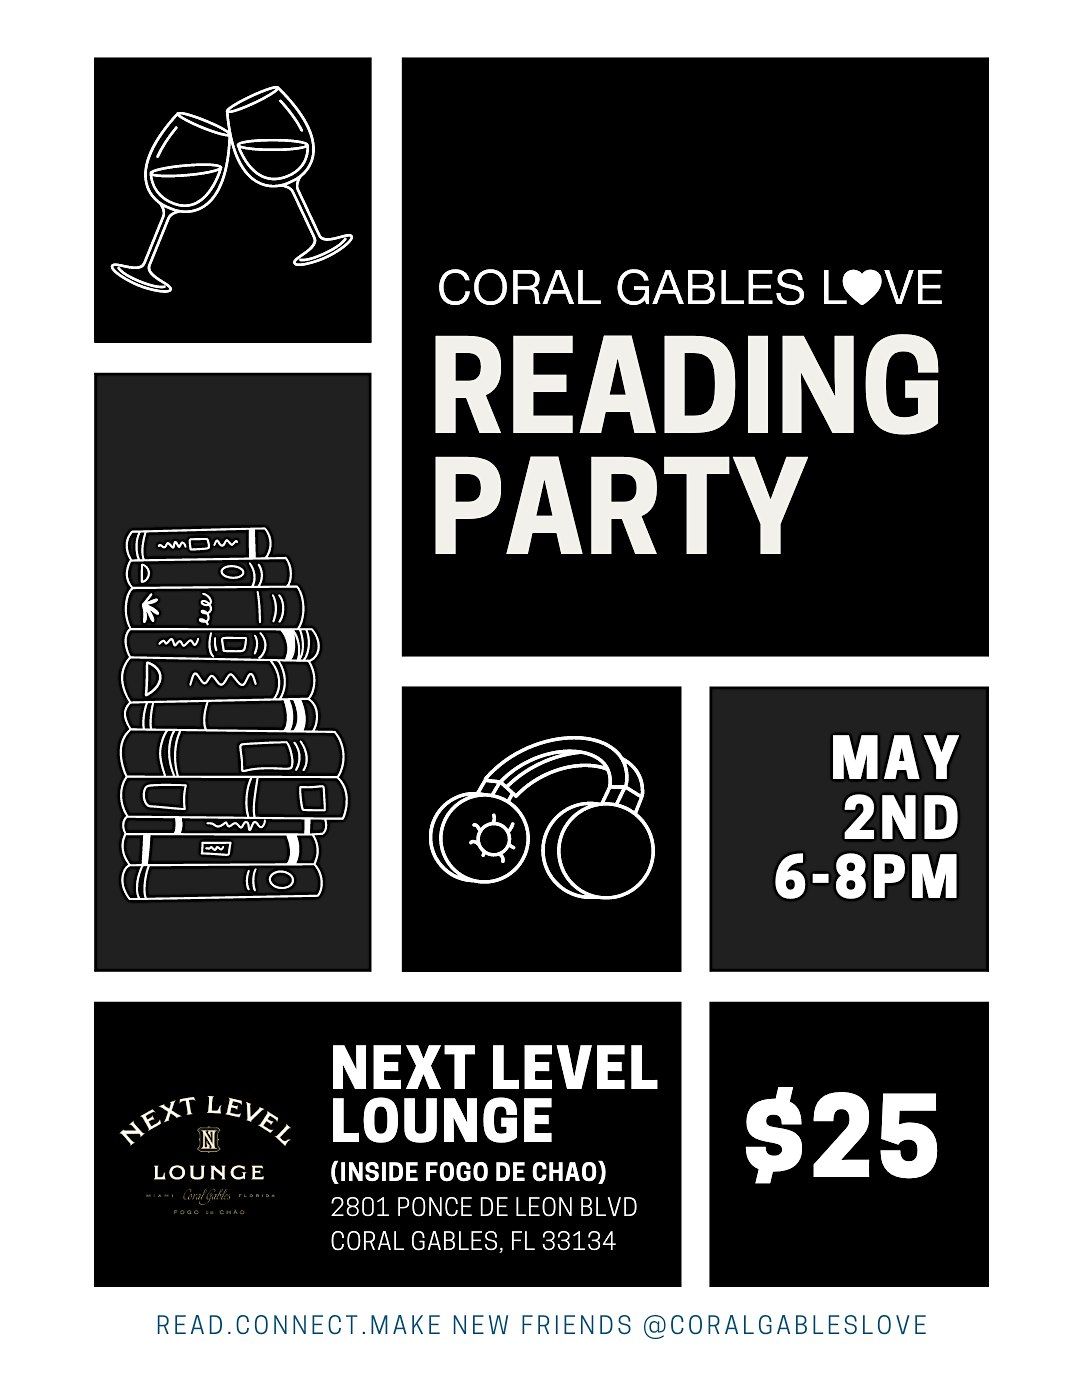 Coral Gables Love Reading Party